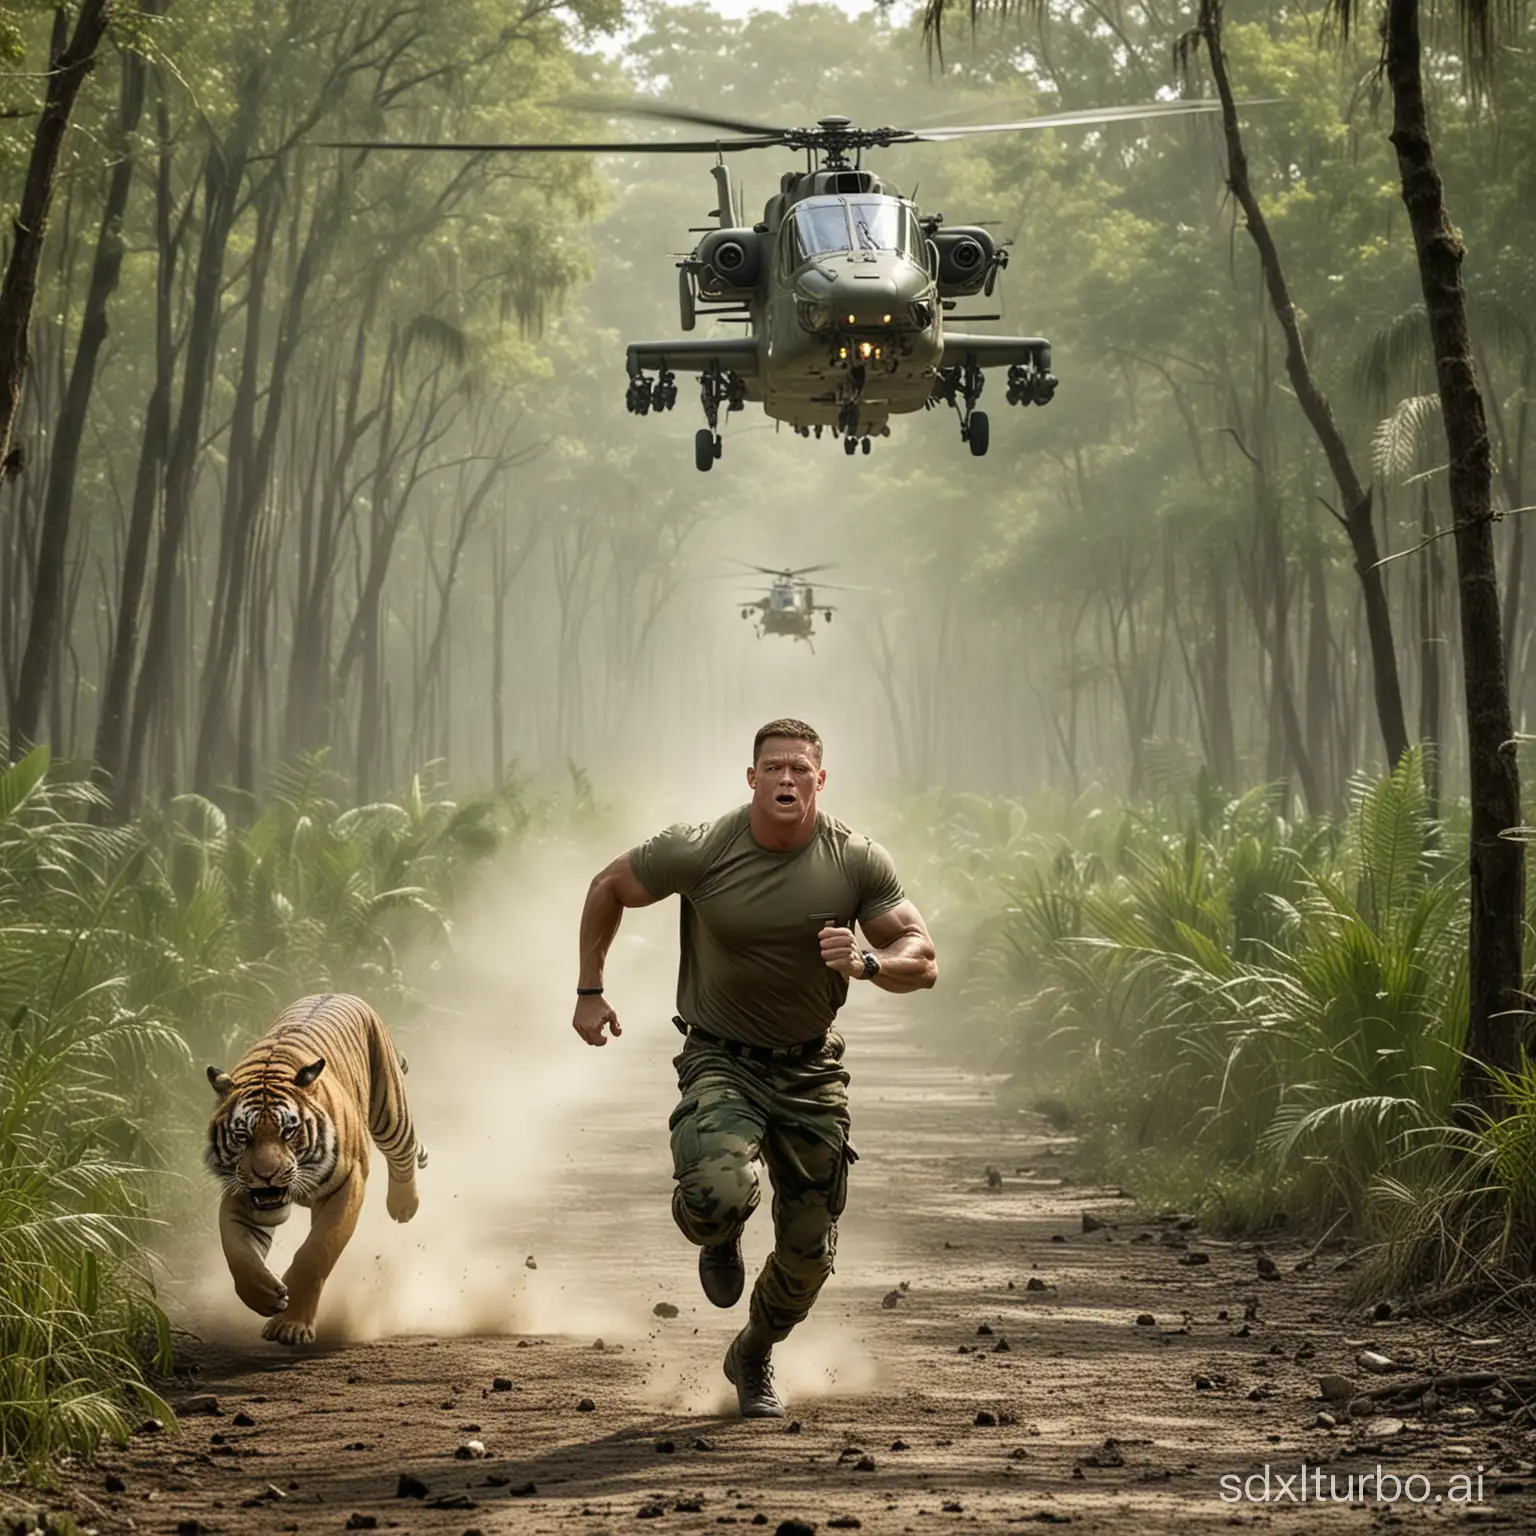 John cena running in the woods with tiger chasing and he is running into the swamp that has an alligator waiting for him, also there is an Attack helicopter in the sky